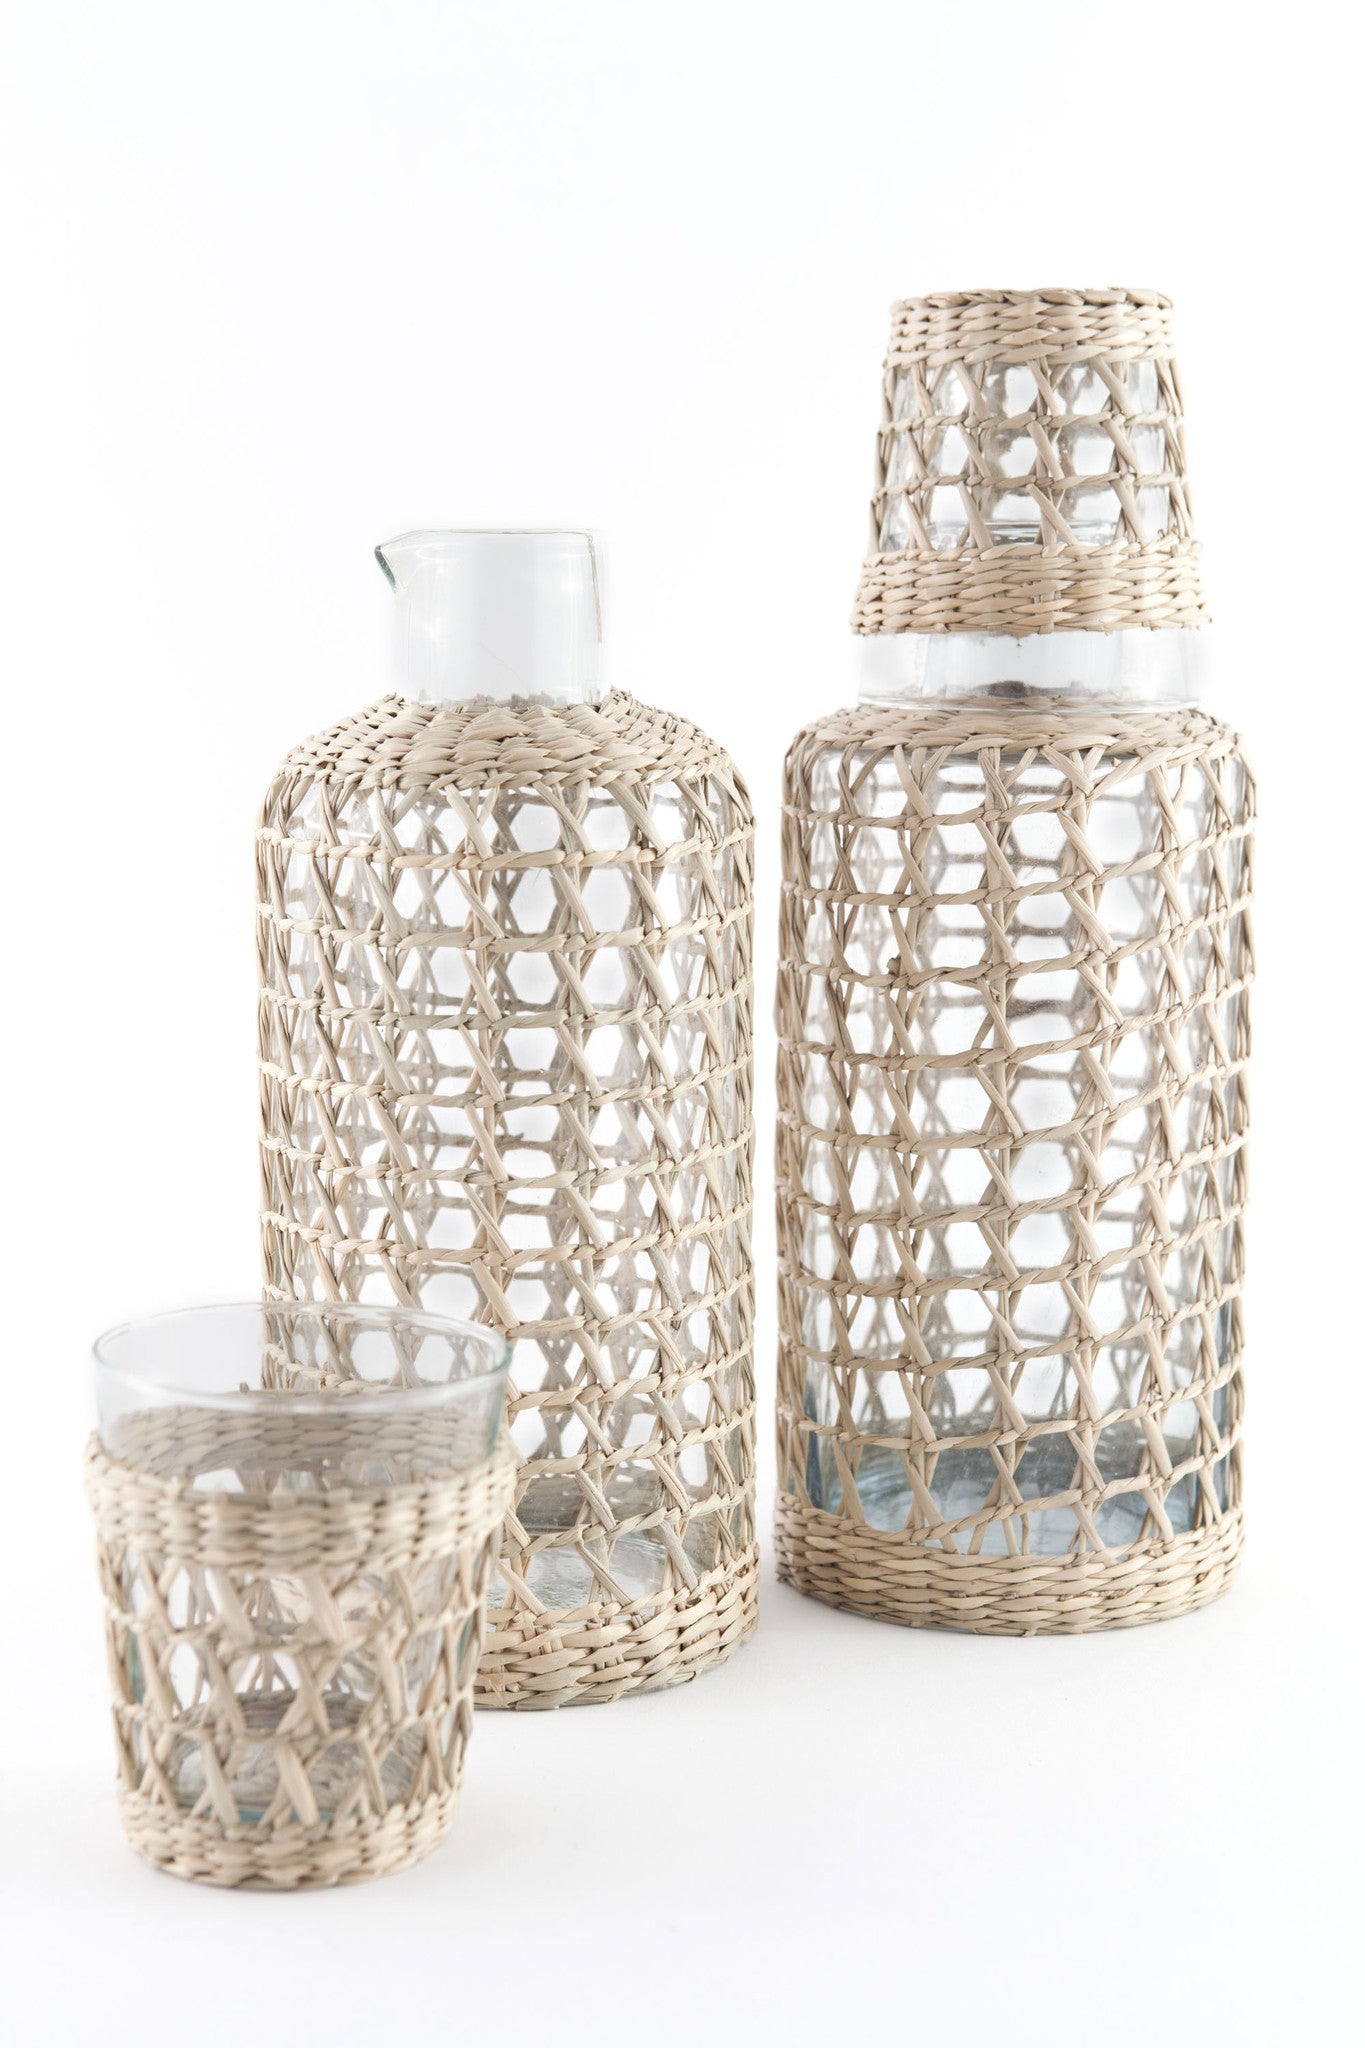 Seagrass Large Cage Carafe Glass Seagrass Brand_Seagrass & Rattan Carafes Kitchen_Drinkware Serving Pieces Caged_Carafe_and_Mini_Tumbler_Set_A